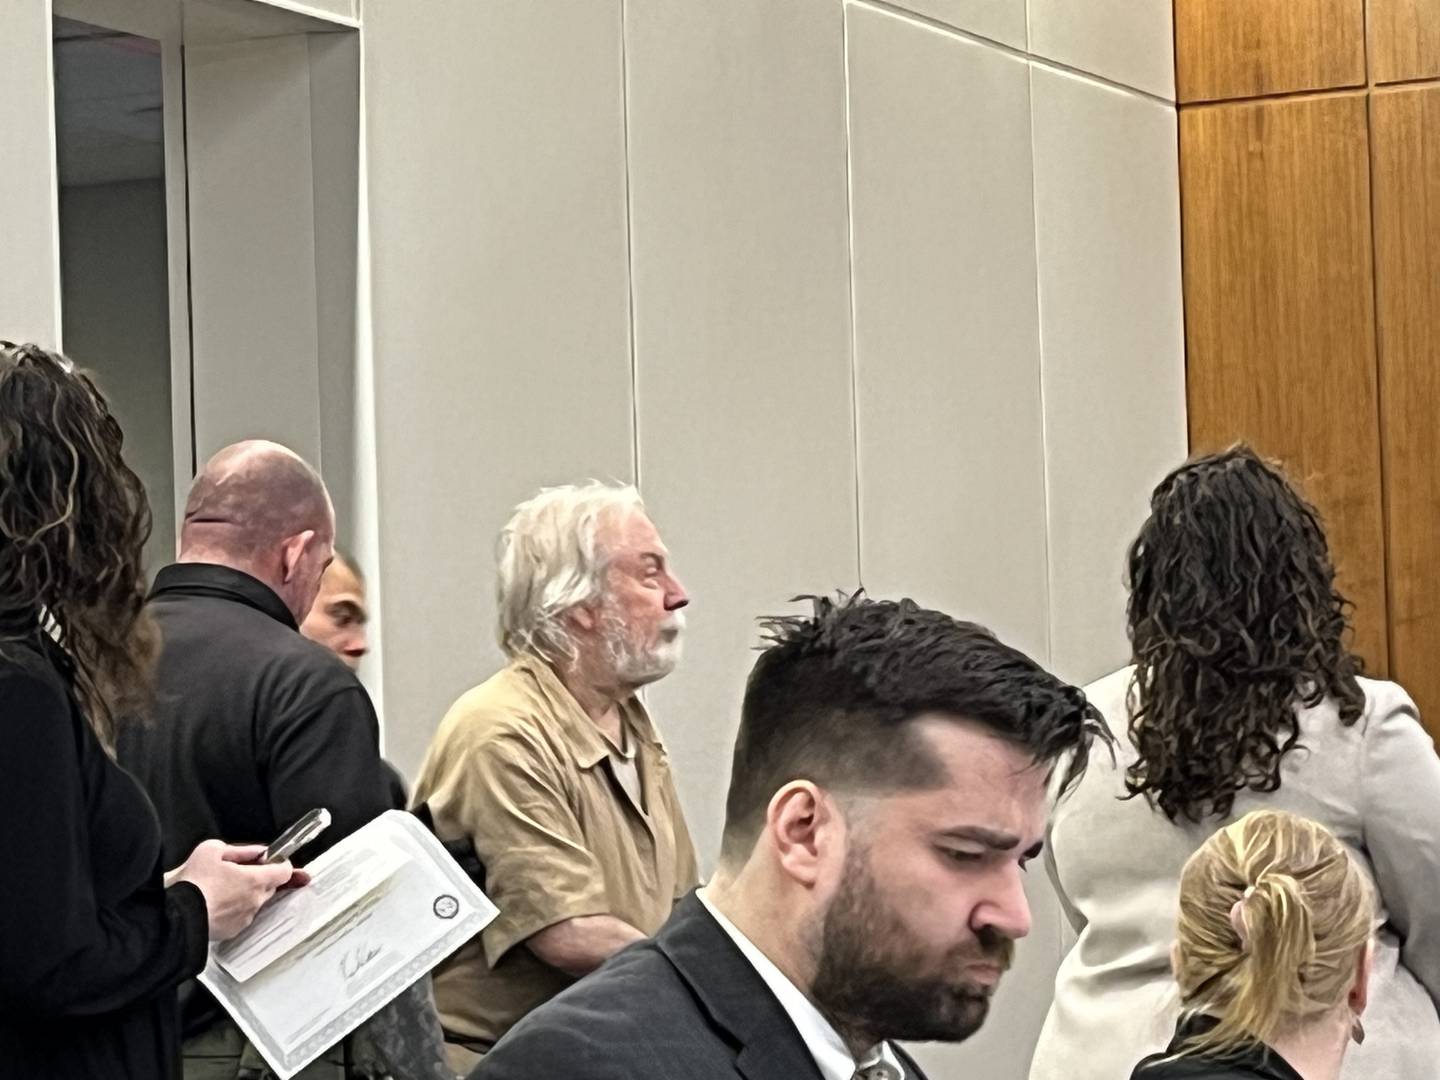 Drew Peterson, a former Bolingbrook police officer, enters a Will County courtroom on Monday, Feb. 5, 2024. Peterson made his first court appearance since filing a petition seeking to overturn his 2012 conviction for the murder of his third wife Kathleen Savio in 2004.